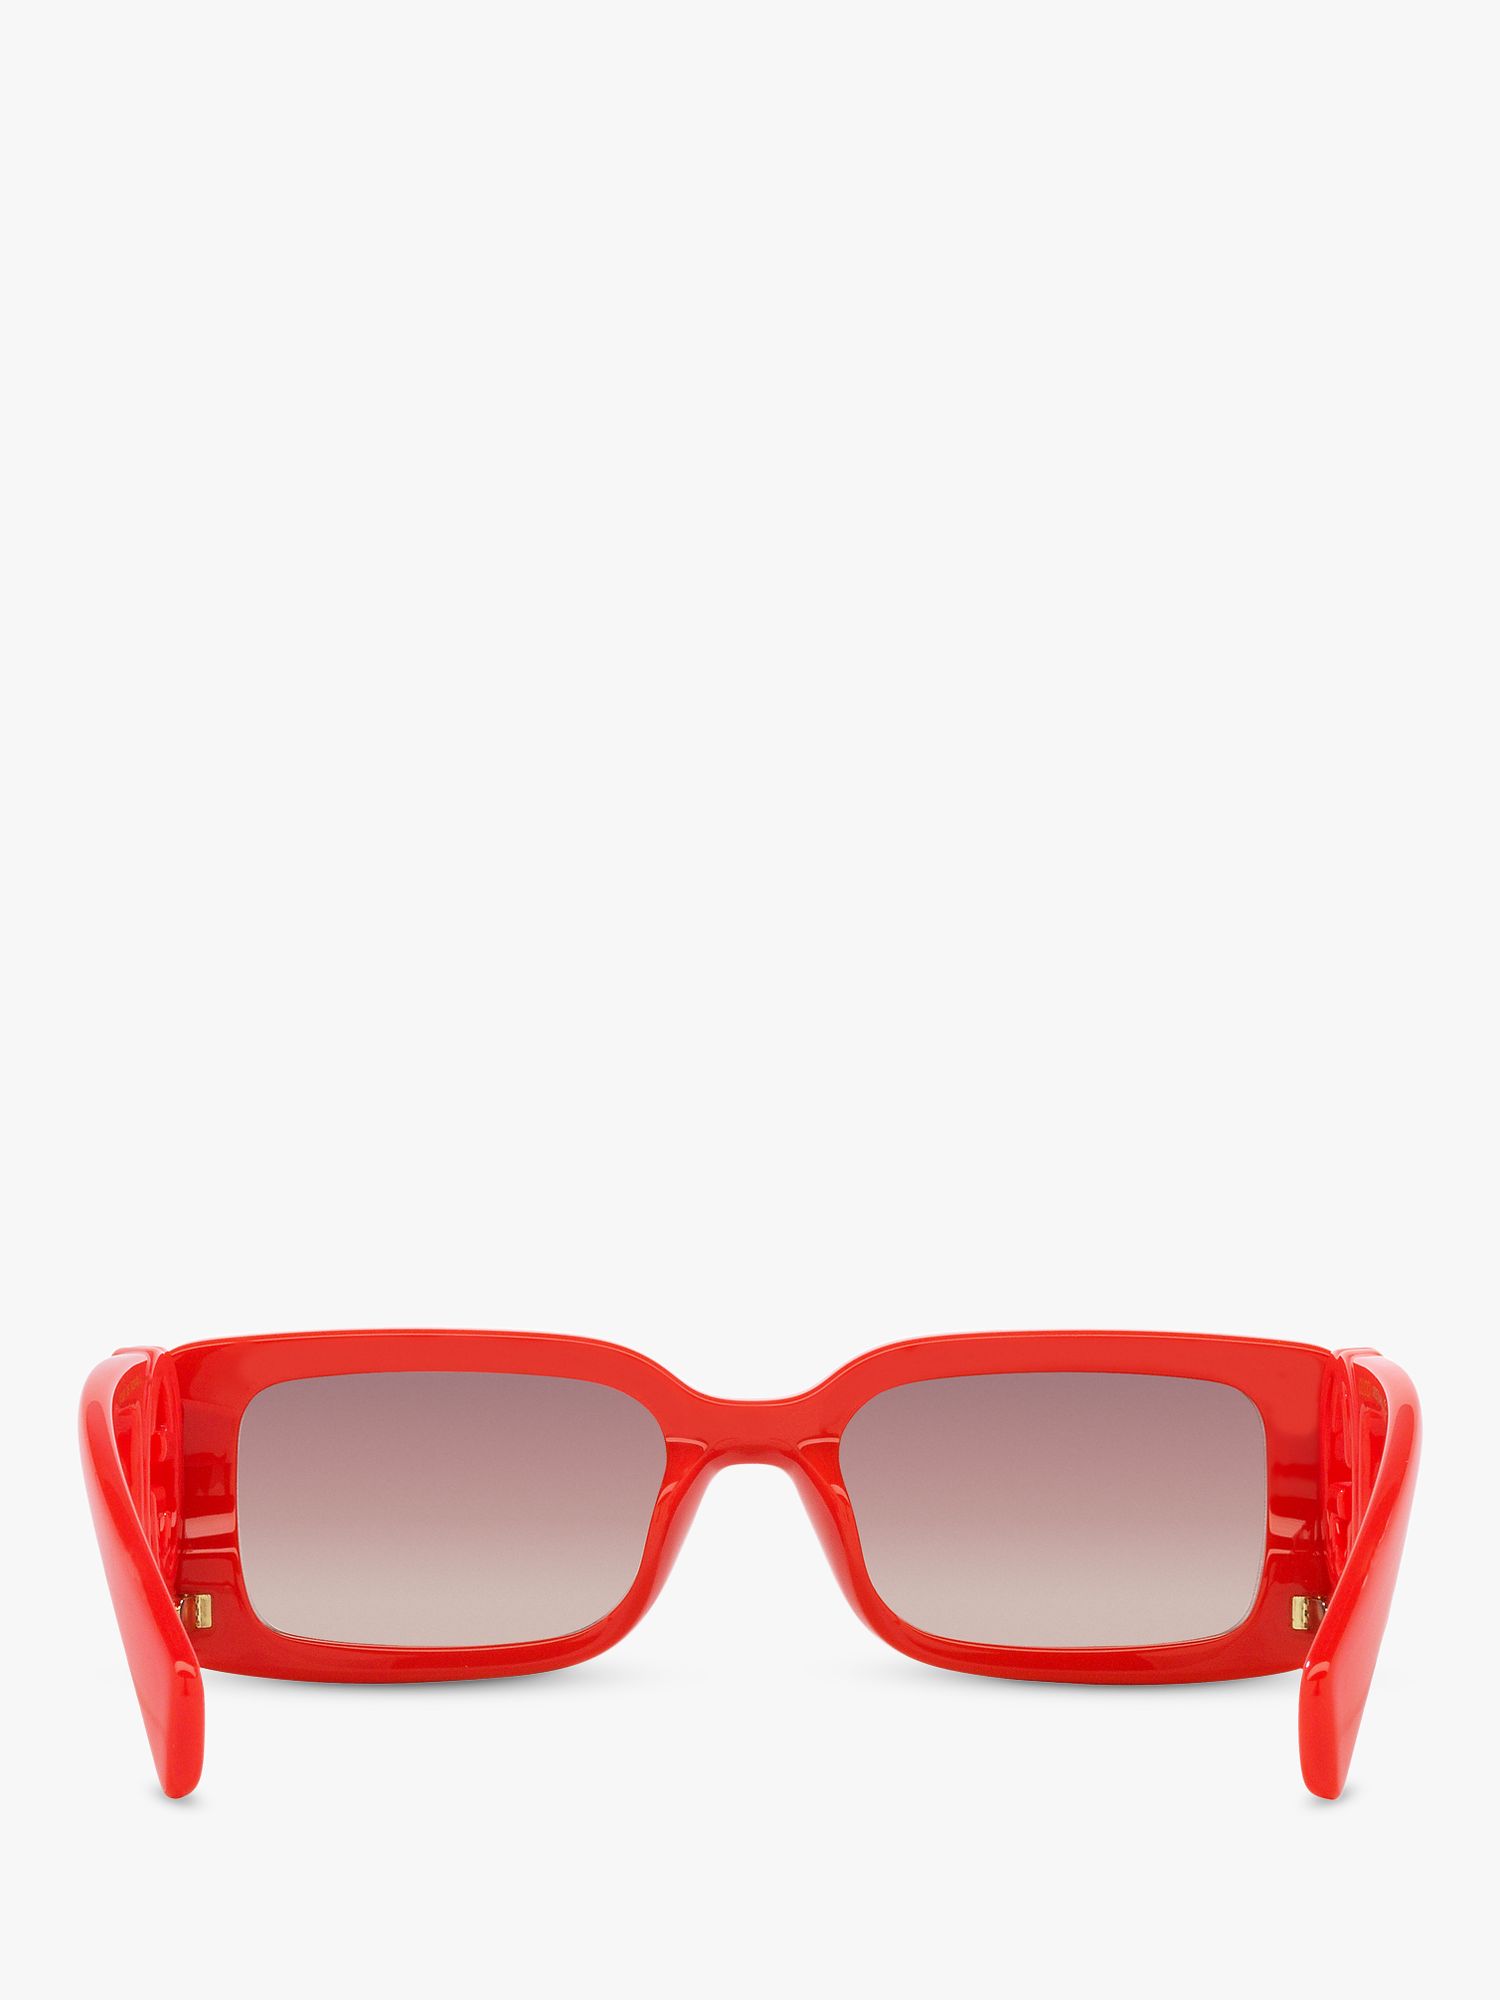 Buy Gucci GG1325S Women's Rectangular Sunglasses, Shiny Red/Brown Gradient Online at johnlewis.com